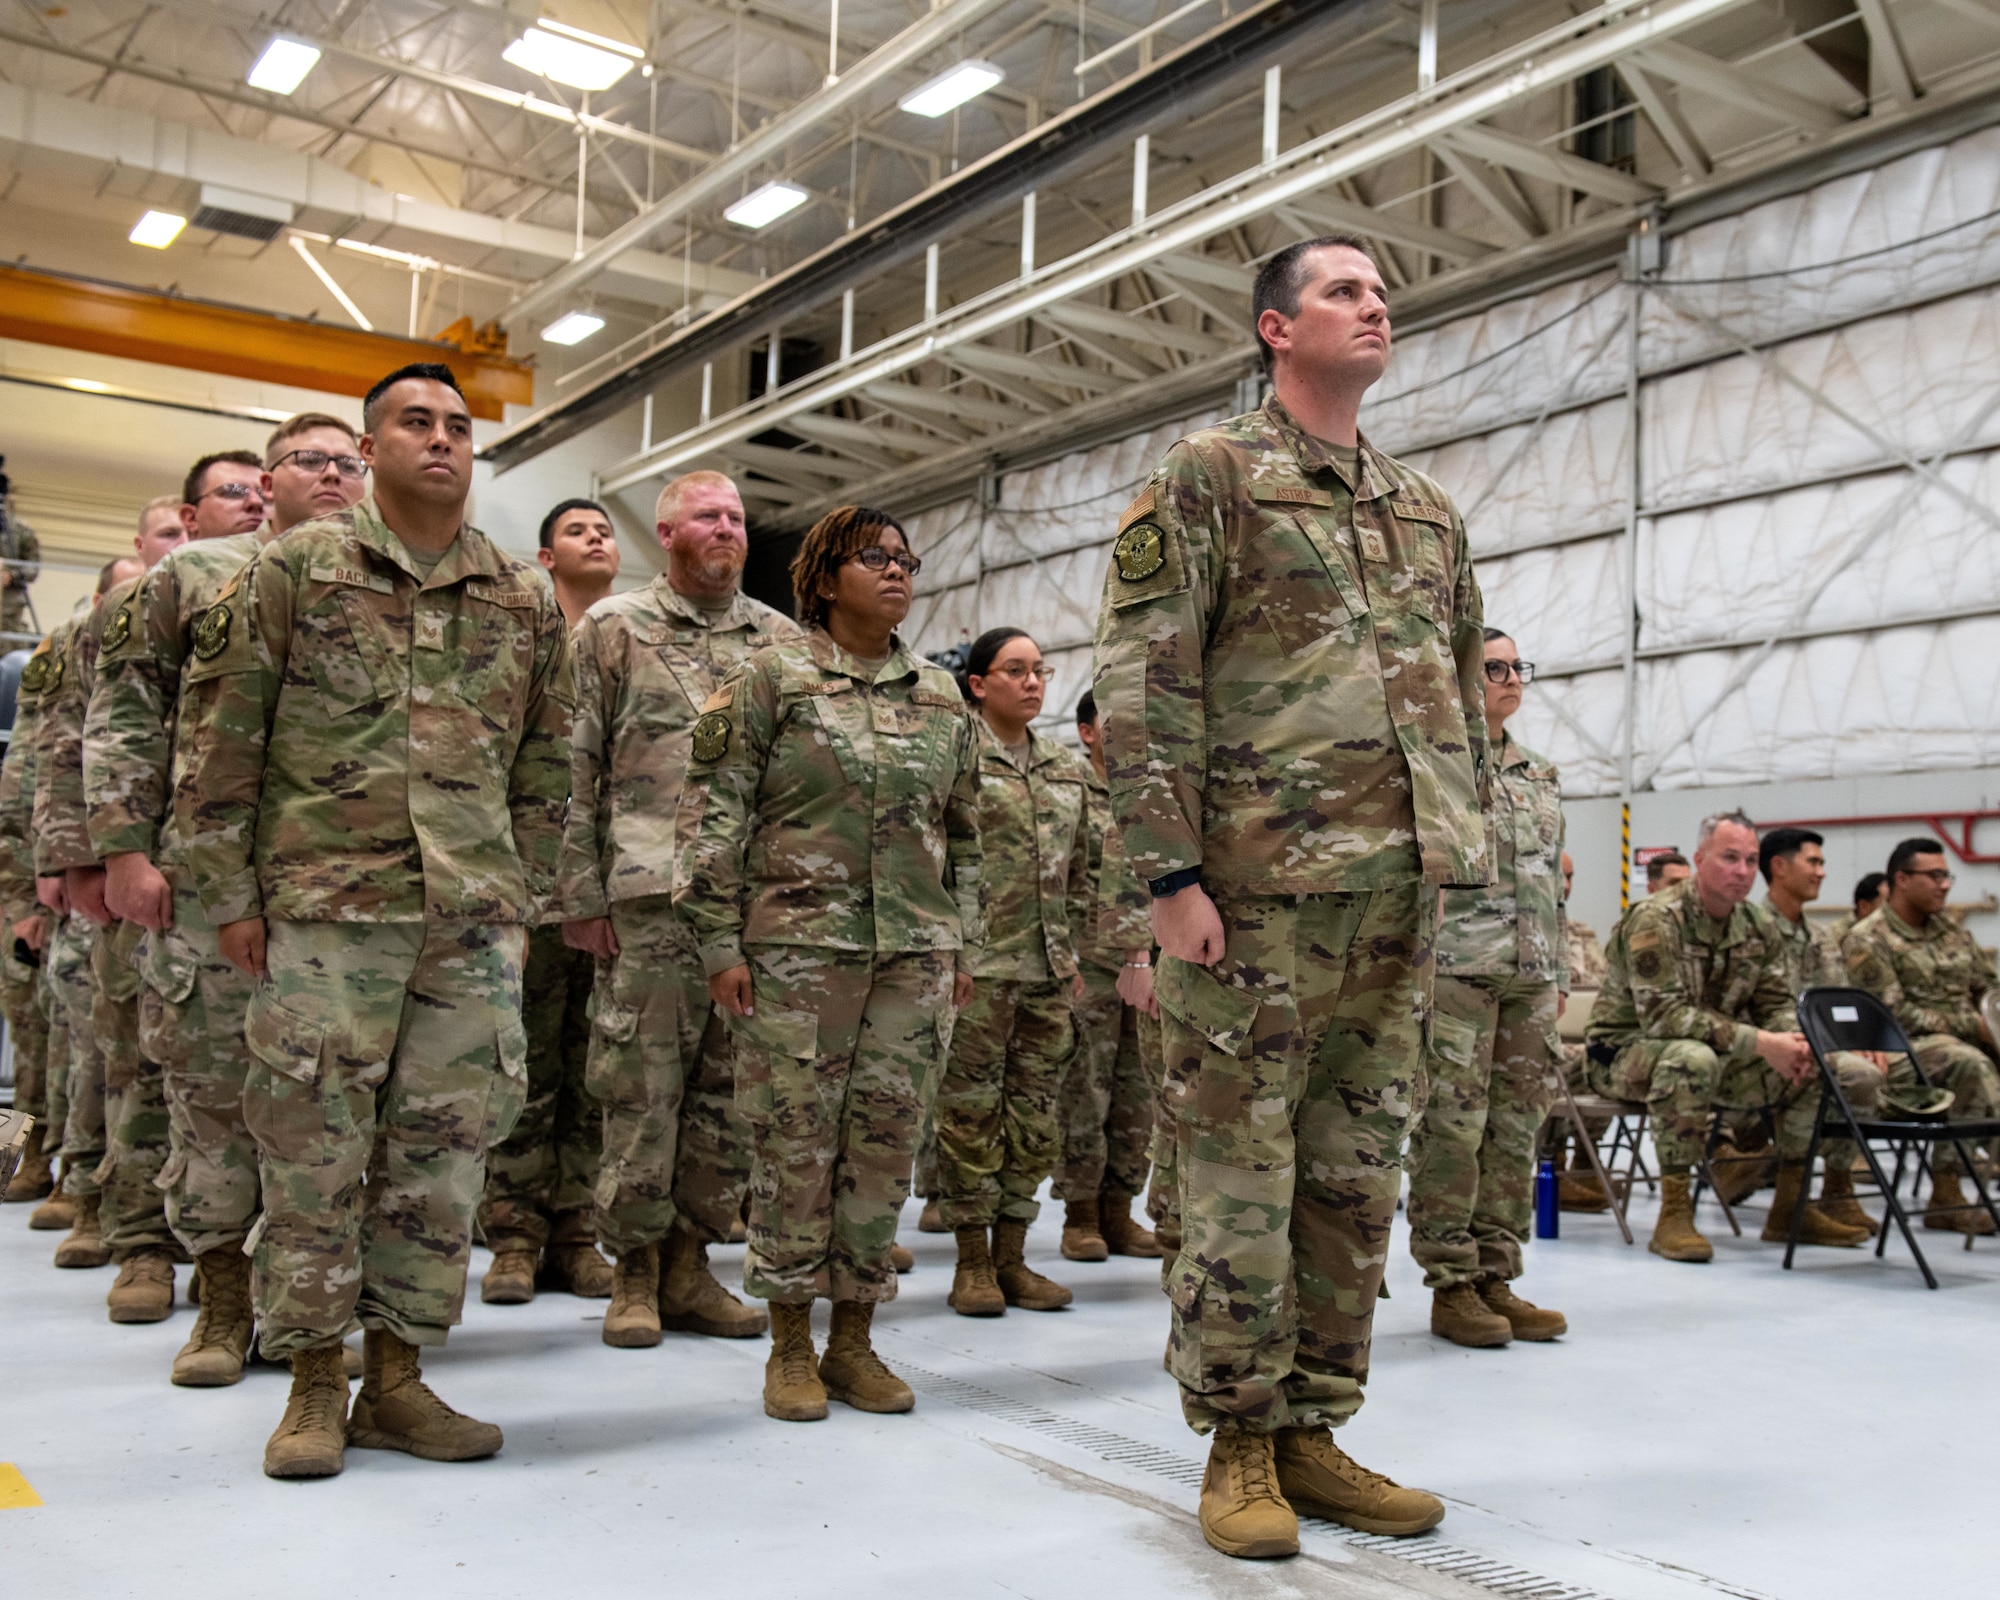 Lt. Col. Joseph Romeo, 943rd Security Forces commander, assumes command during a change of name ceremony at Davis-Monthan Air Force Base, Arizona, June 10, 2022. The 943rd SFS mission is to provide the most highly effective, cohesive, and disciplined security force defender professionals in the world.(U.S. Air Force photo by Senior Airman Nicole Koreen)